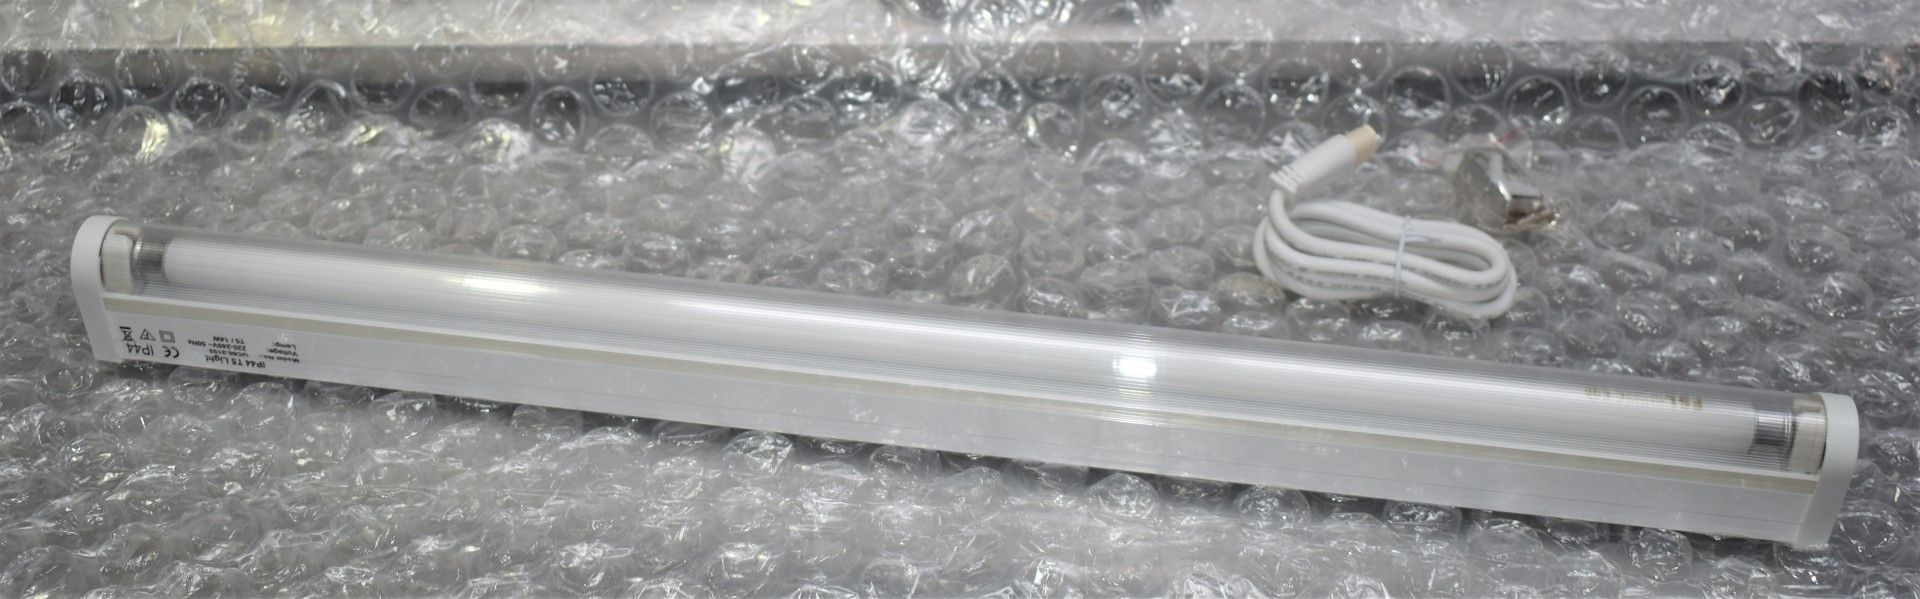 4 x Bathroom Light Fittings - IP44 Waterproof T5 14w Fluorescent Lights With Built-In Electronic